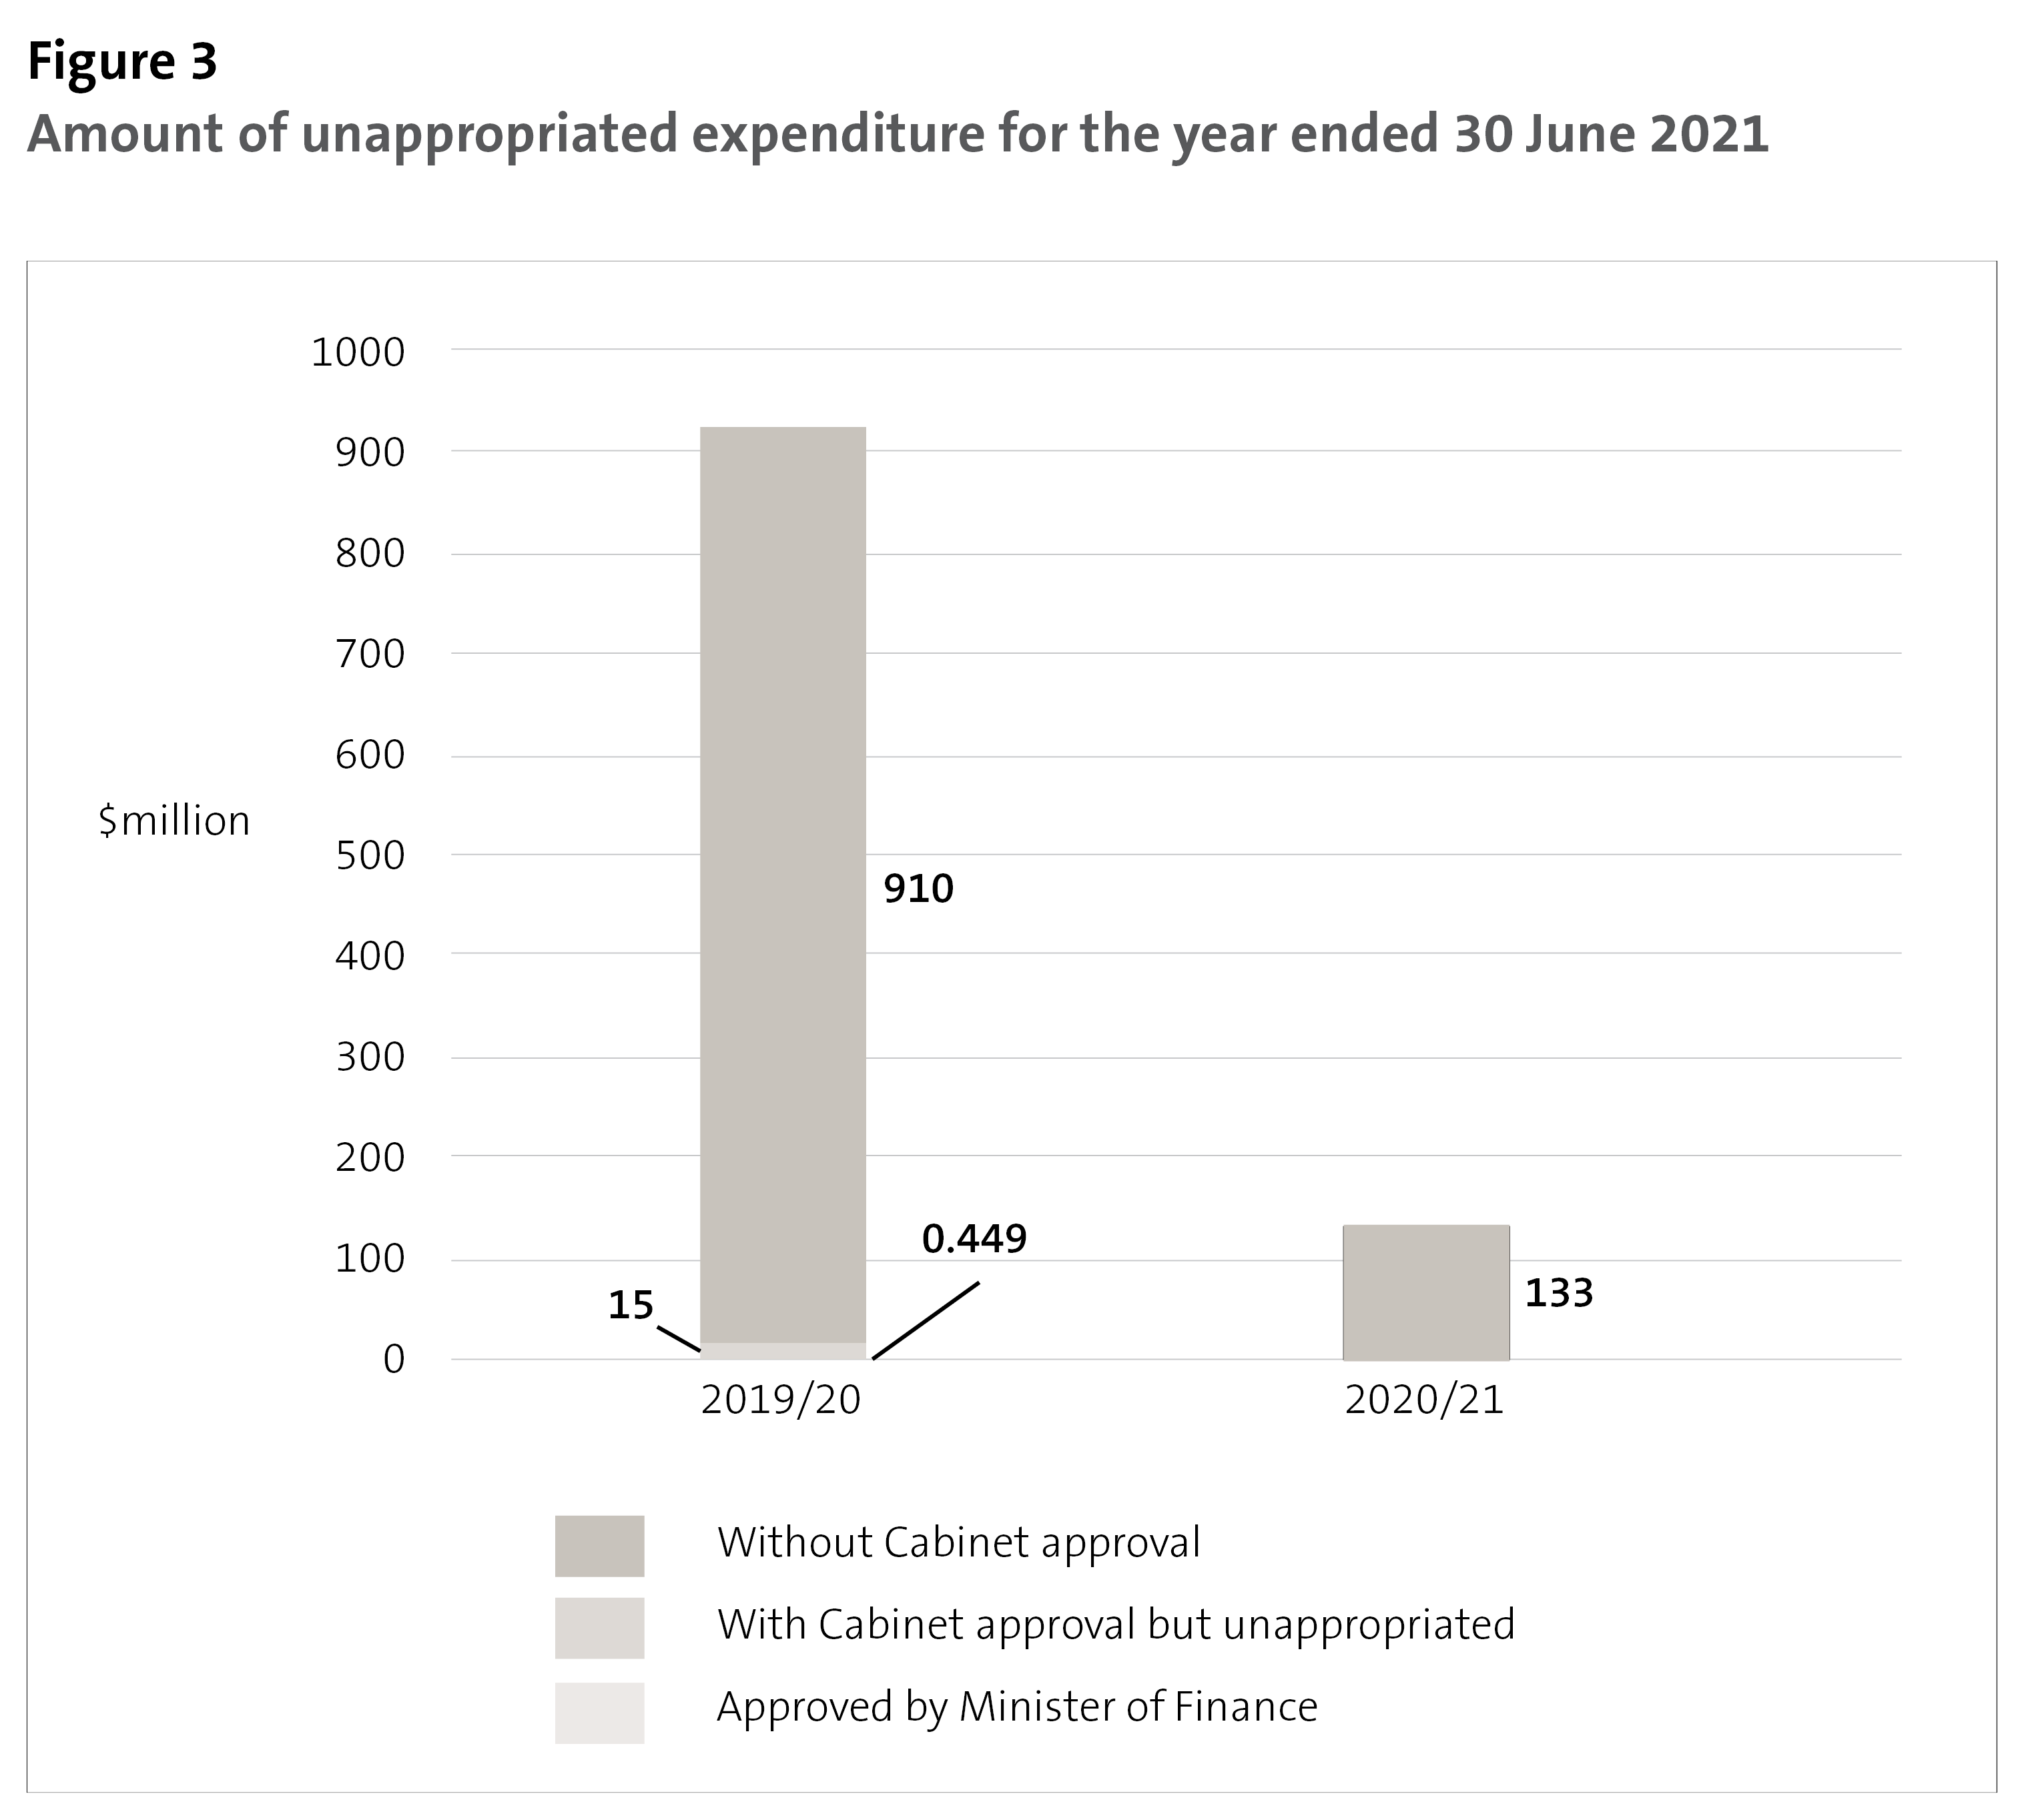 Figure 3 - Amount of unappropriated expenditure for the year ended 30 June 2021